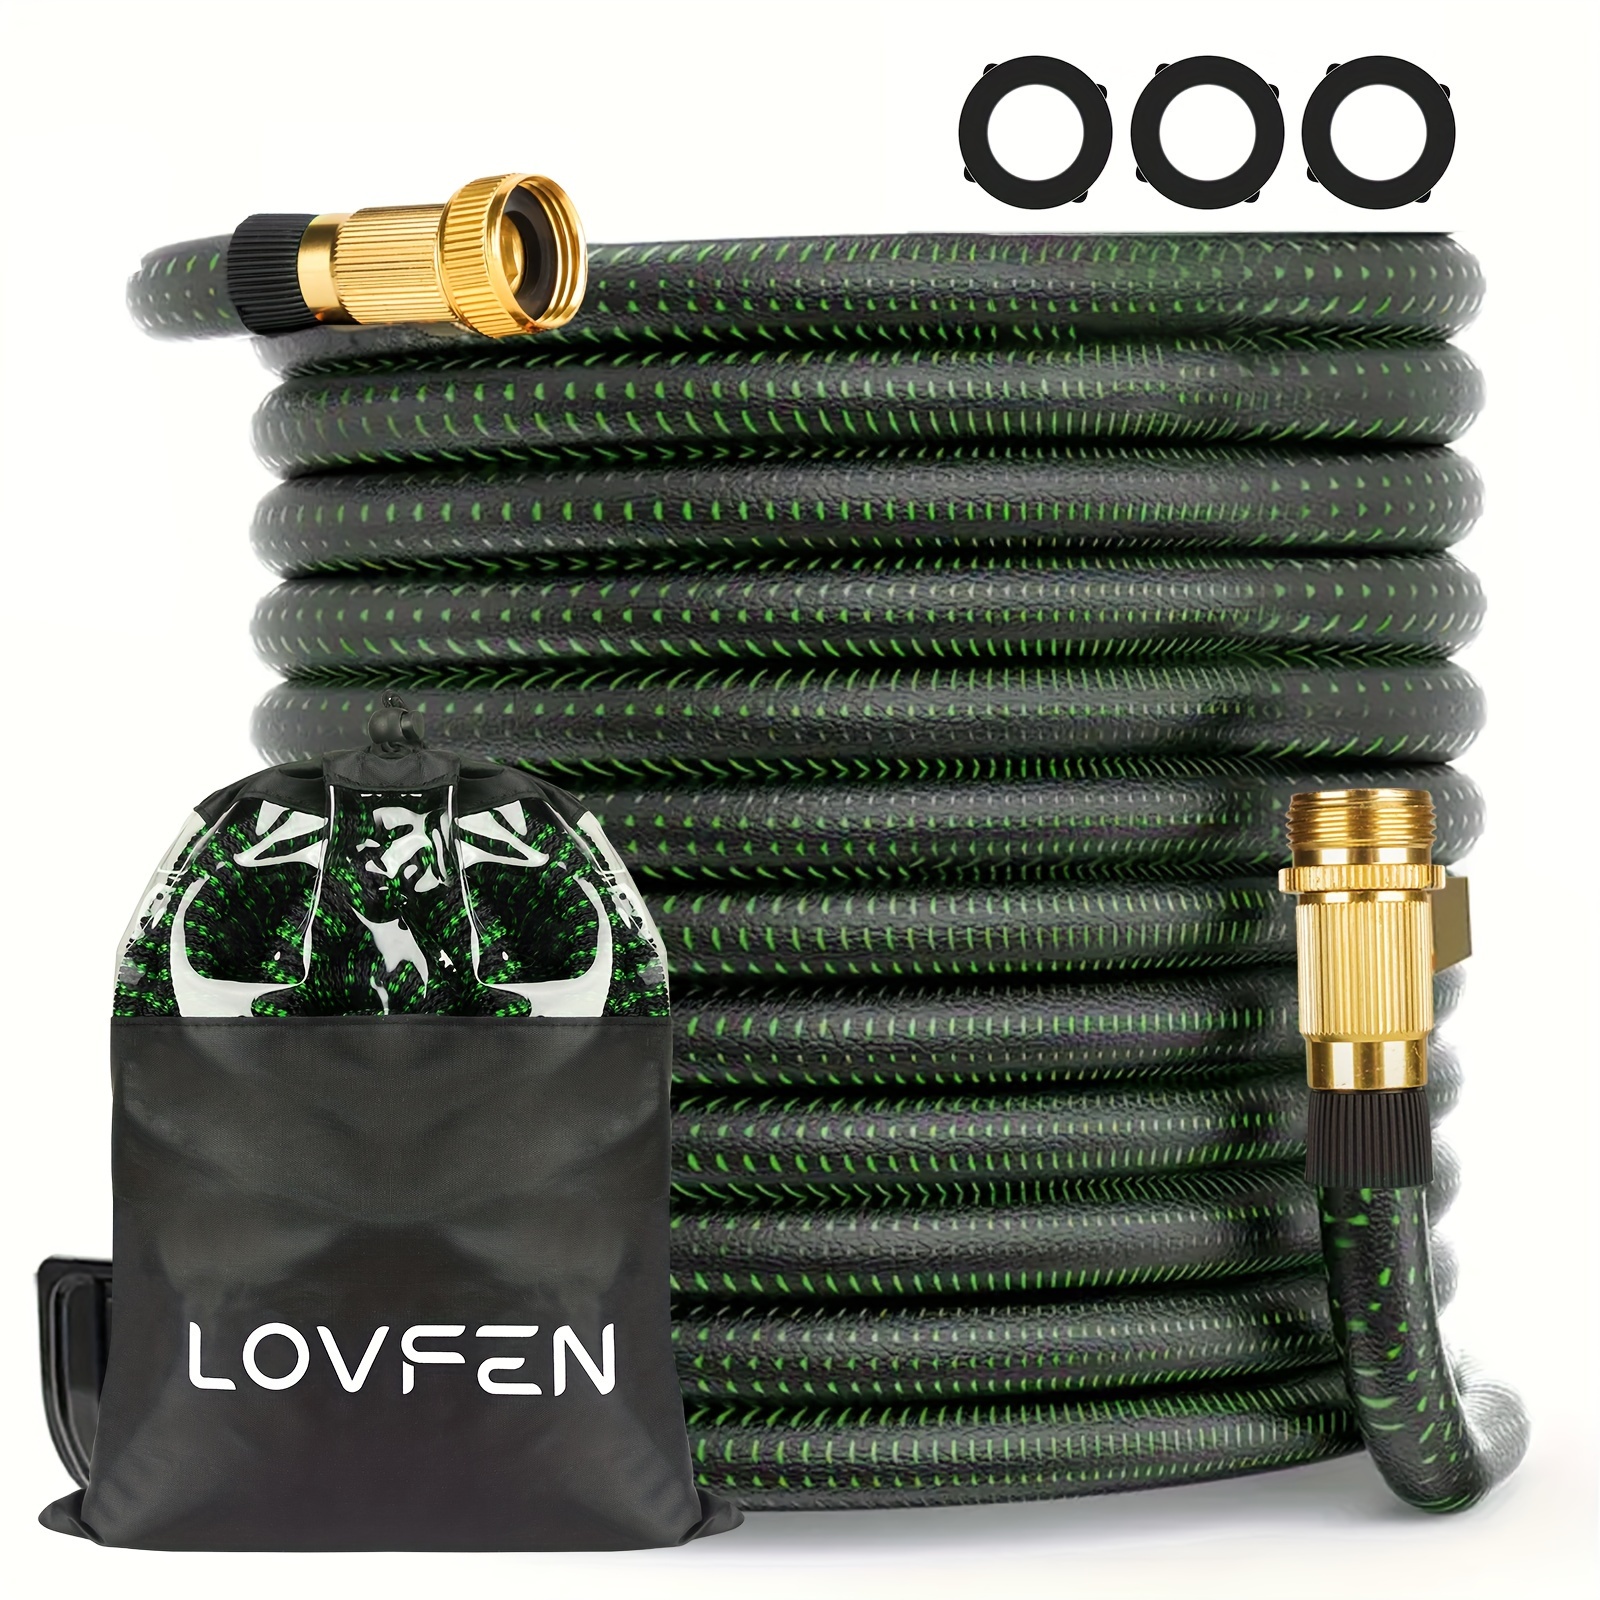 

25/50/75/100/150ft Expandable Garden Hose Kit With 3/4 Solid Brass Fittings, Leakproof Design, Durable Rubber Material, Perfect For Cleaning, Forestry, And Gardening Green